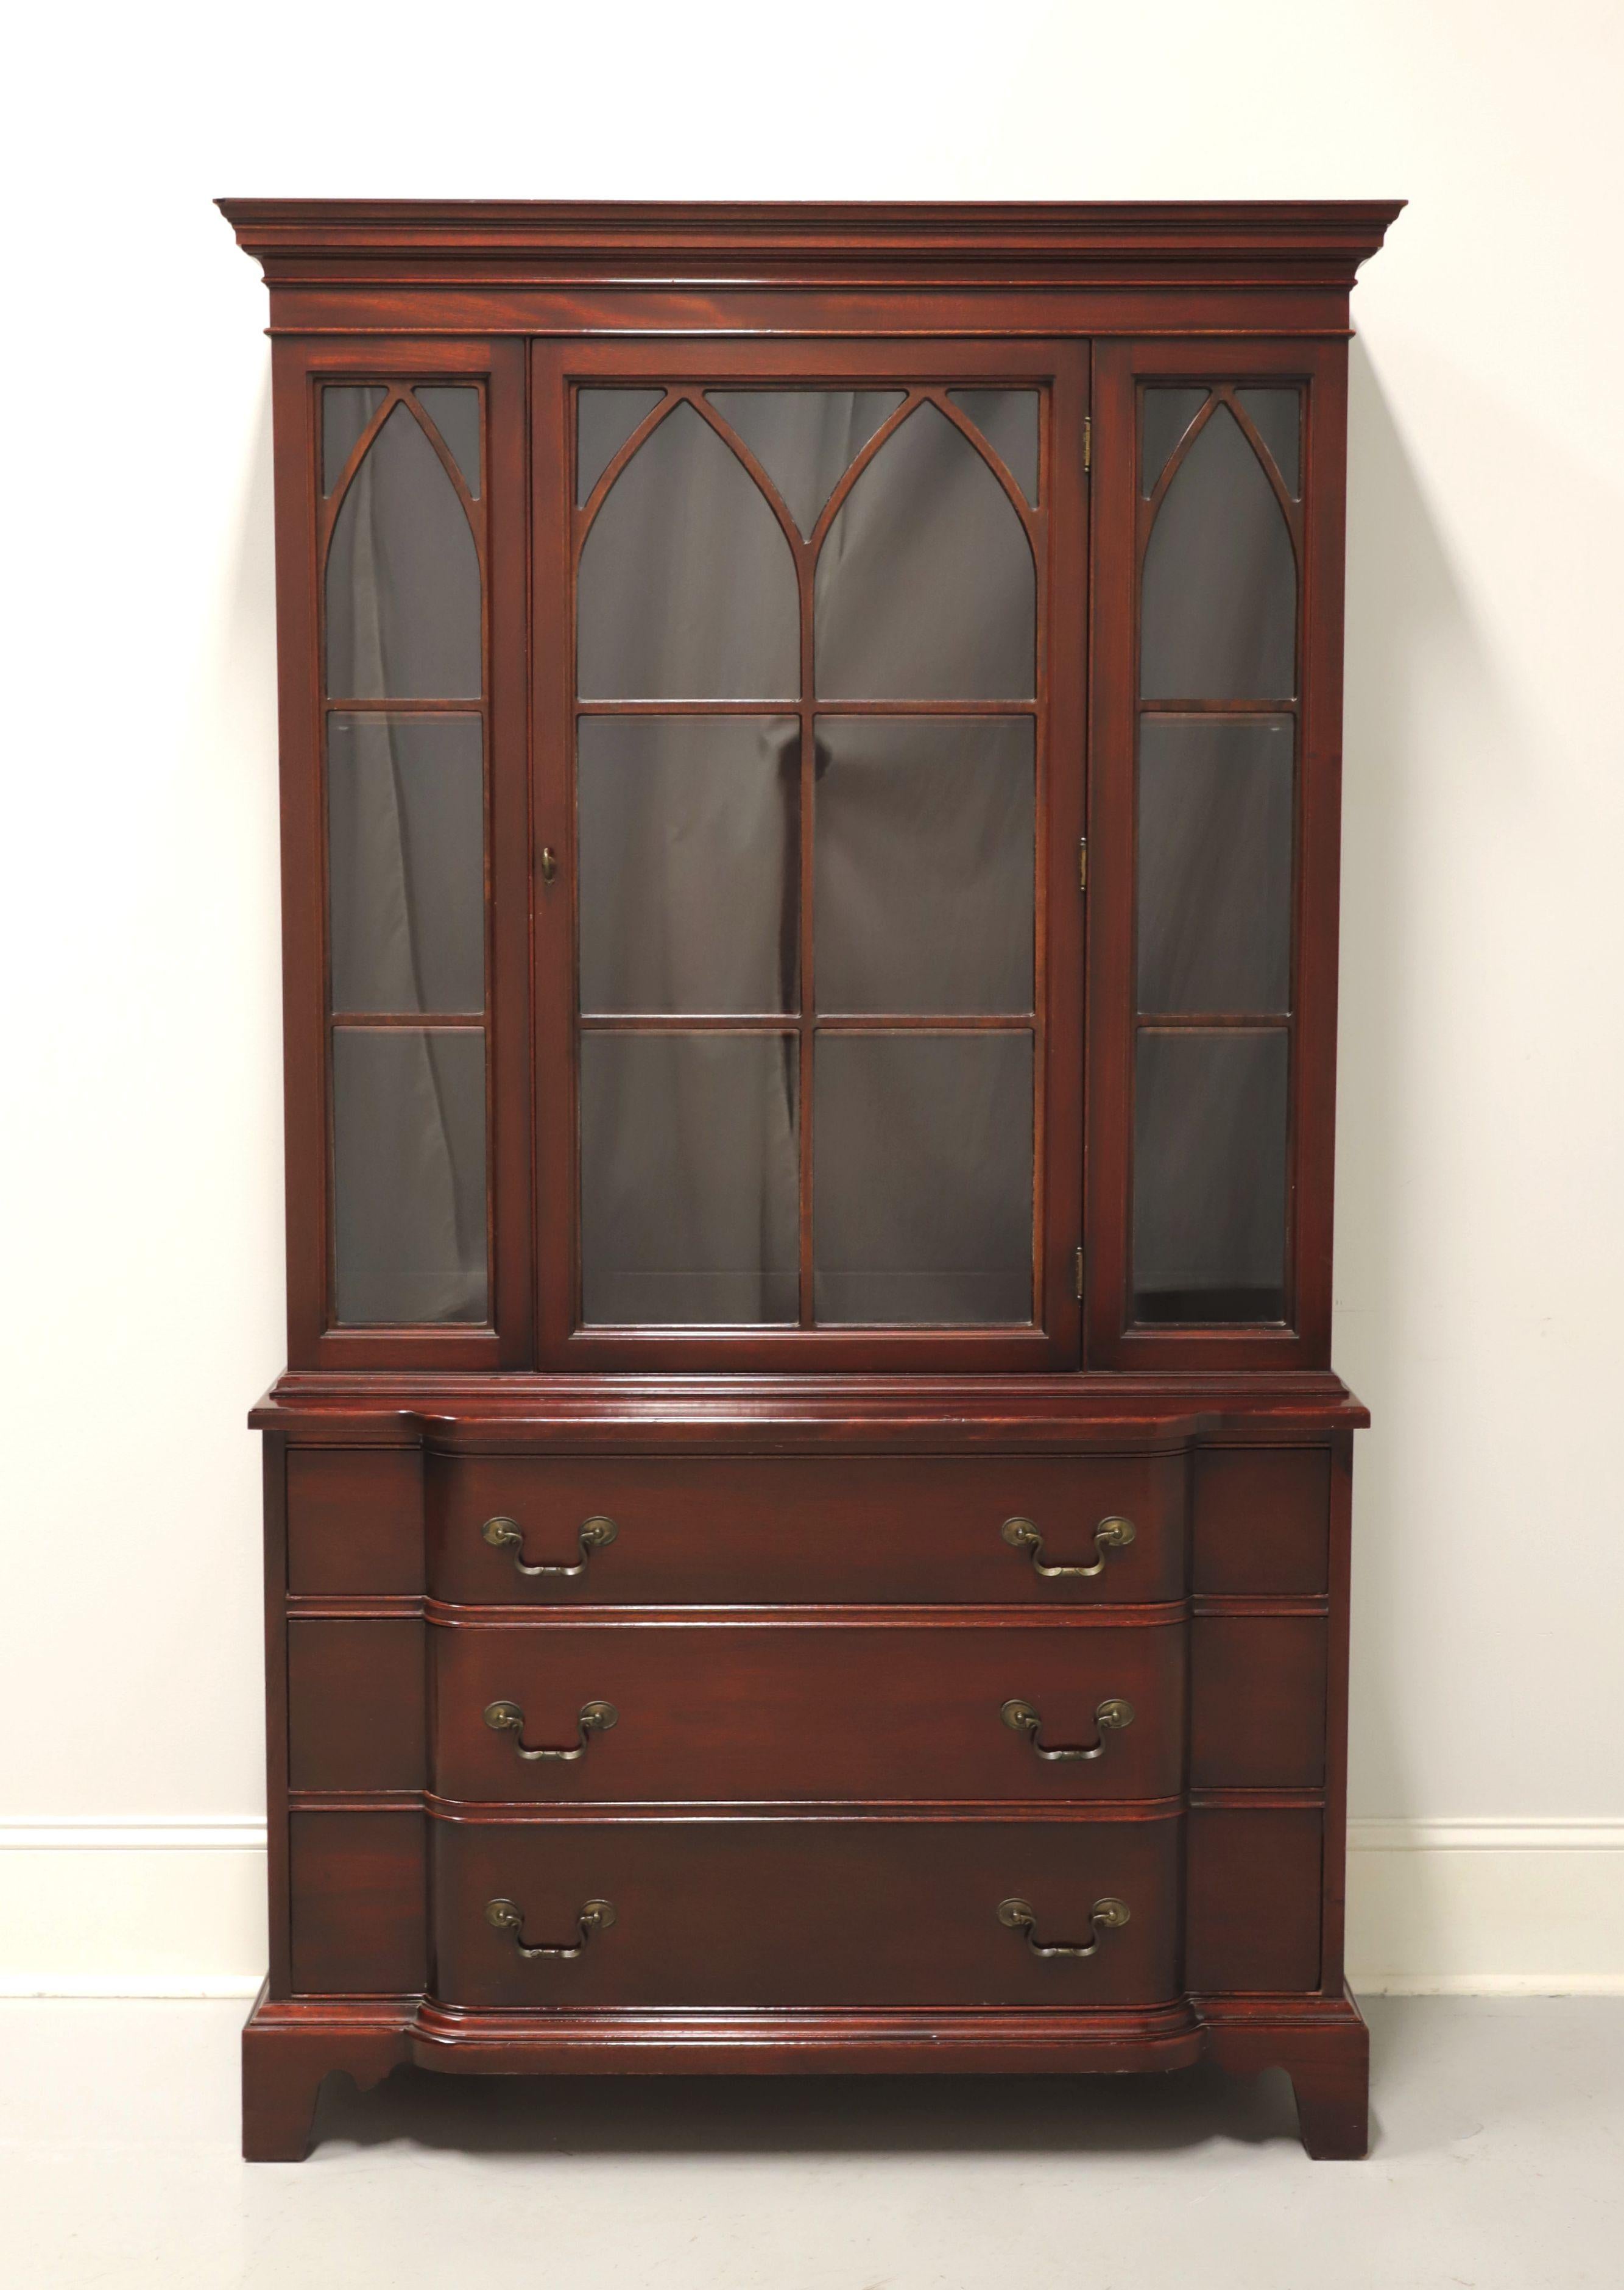 A Georgian style china cabinet by Georgetown Galleries. Solid mahogany with brass hardware, crown molding at top, bowfront lower cabinet and bracket feet. Upper cabinet has one center glass door with flanking side panels, fretwork over glass, and